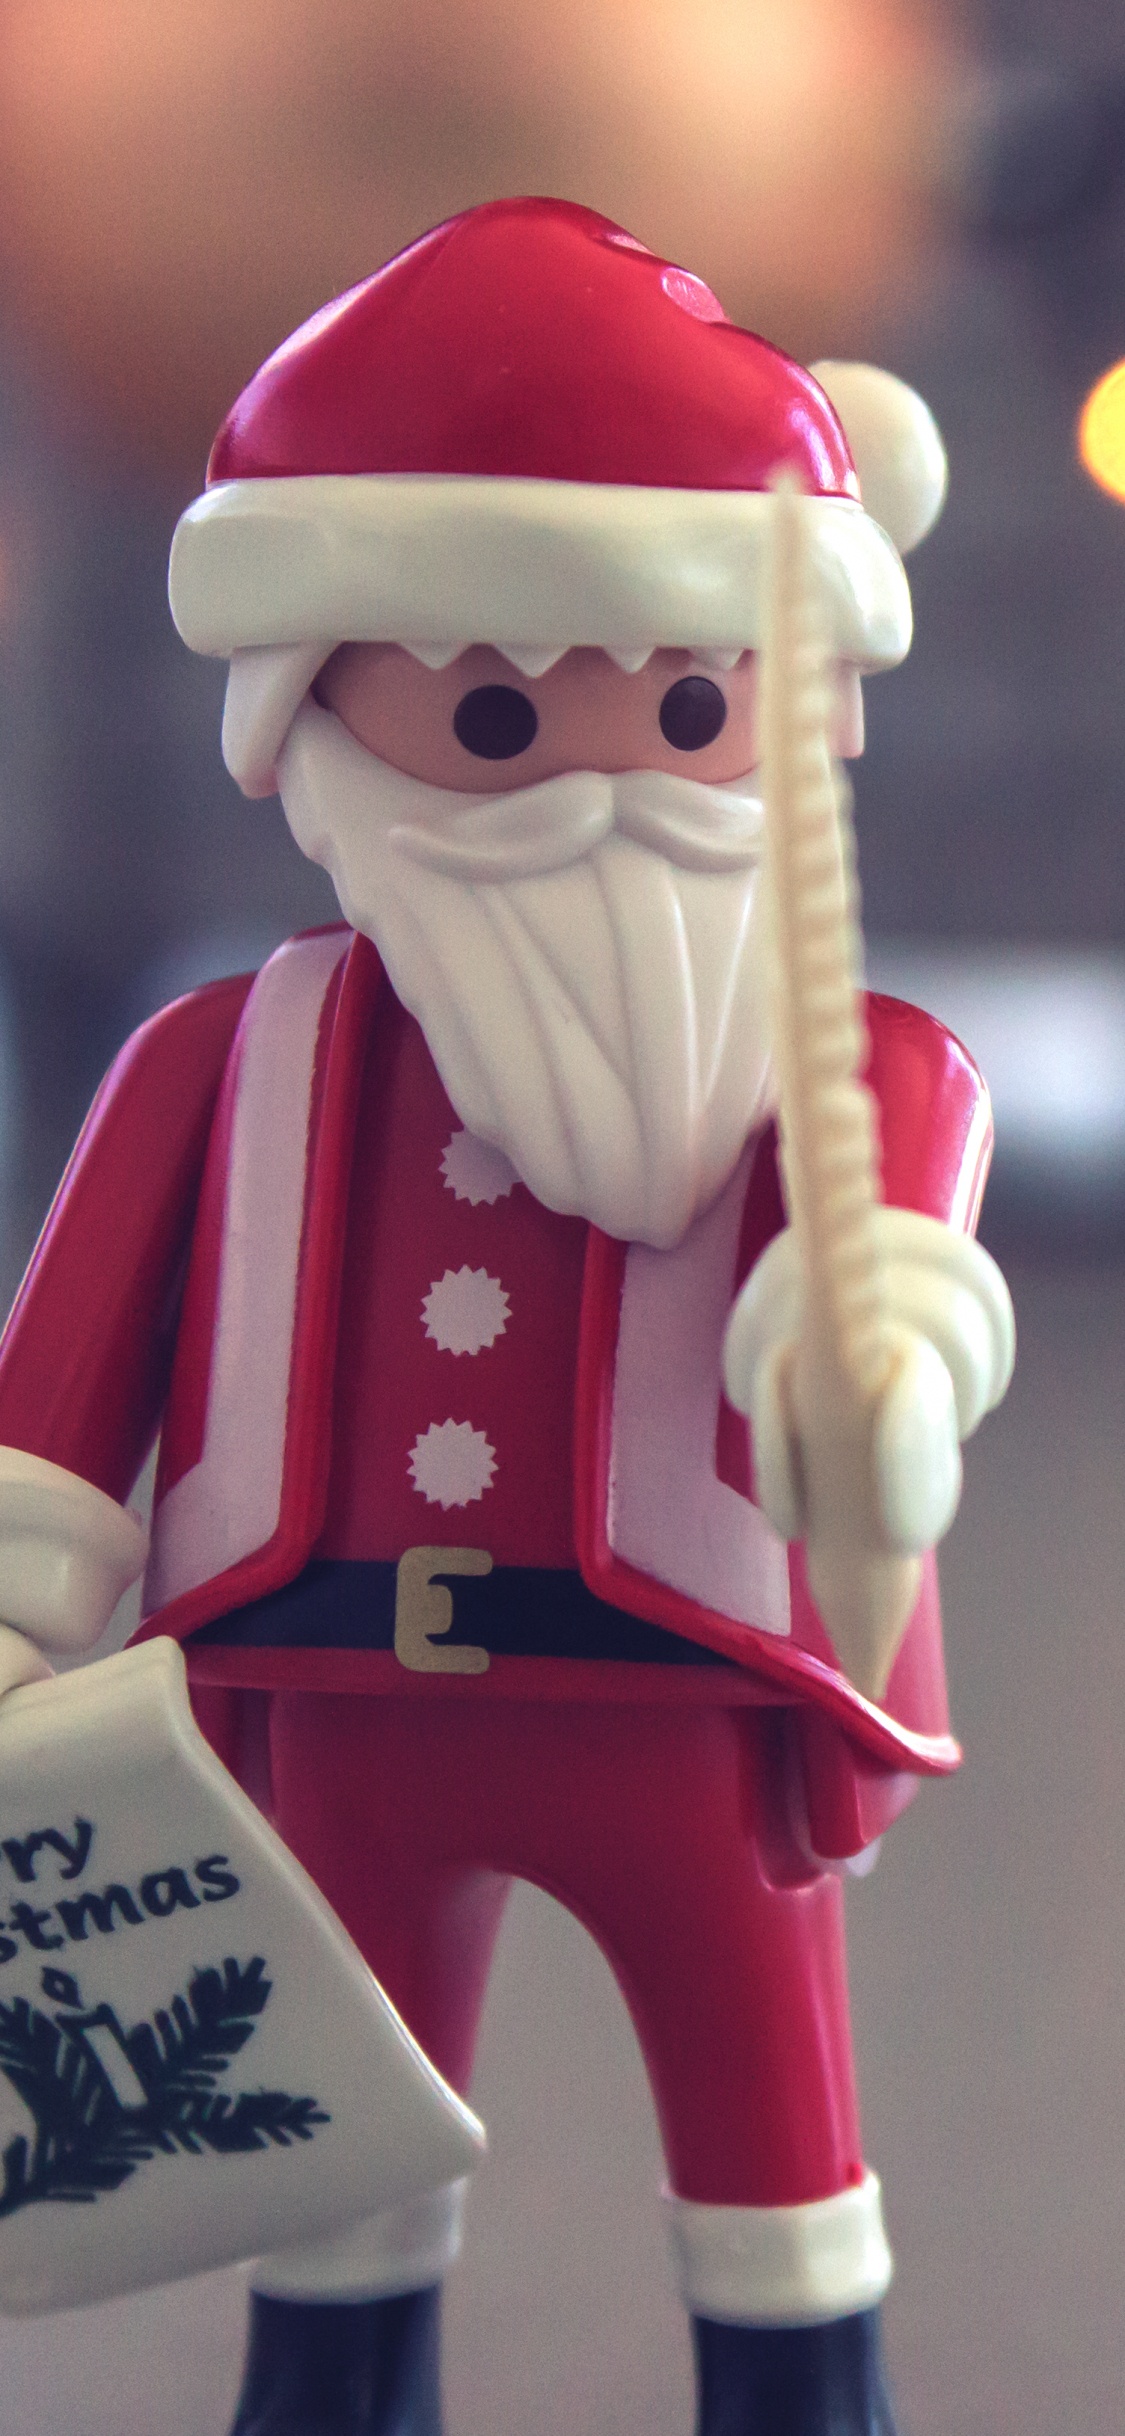 Santa Claus, Christmas Day, Figurine, Toy, Christmas. Wallpaper in 1125x2436 Resolution